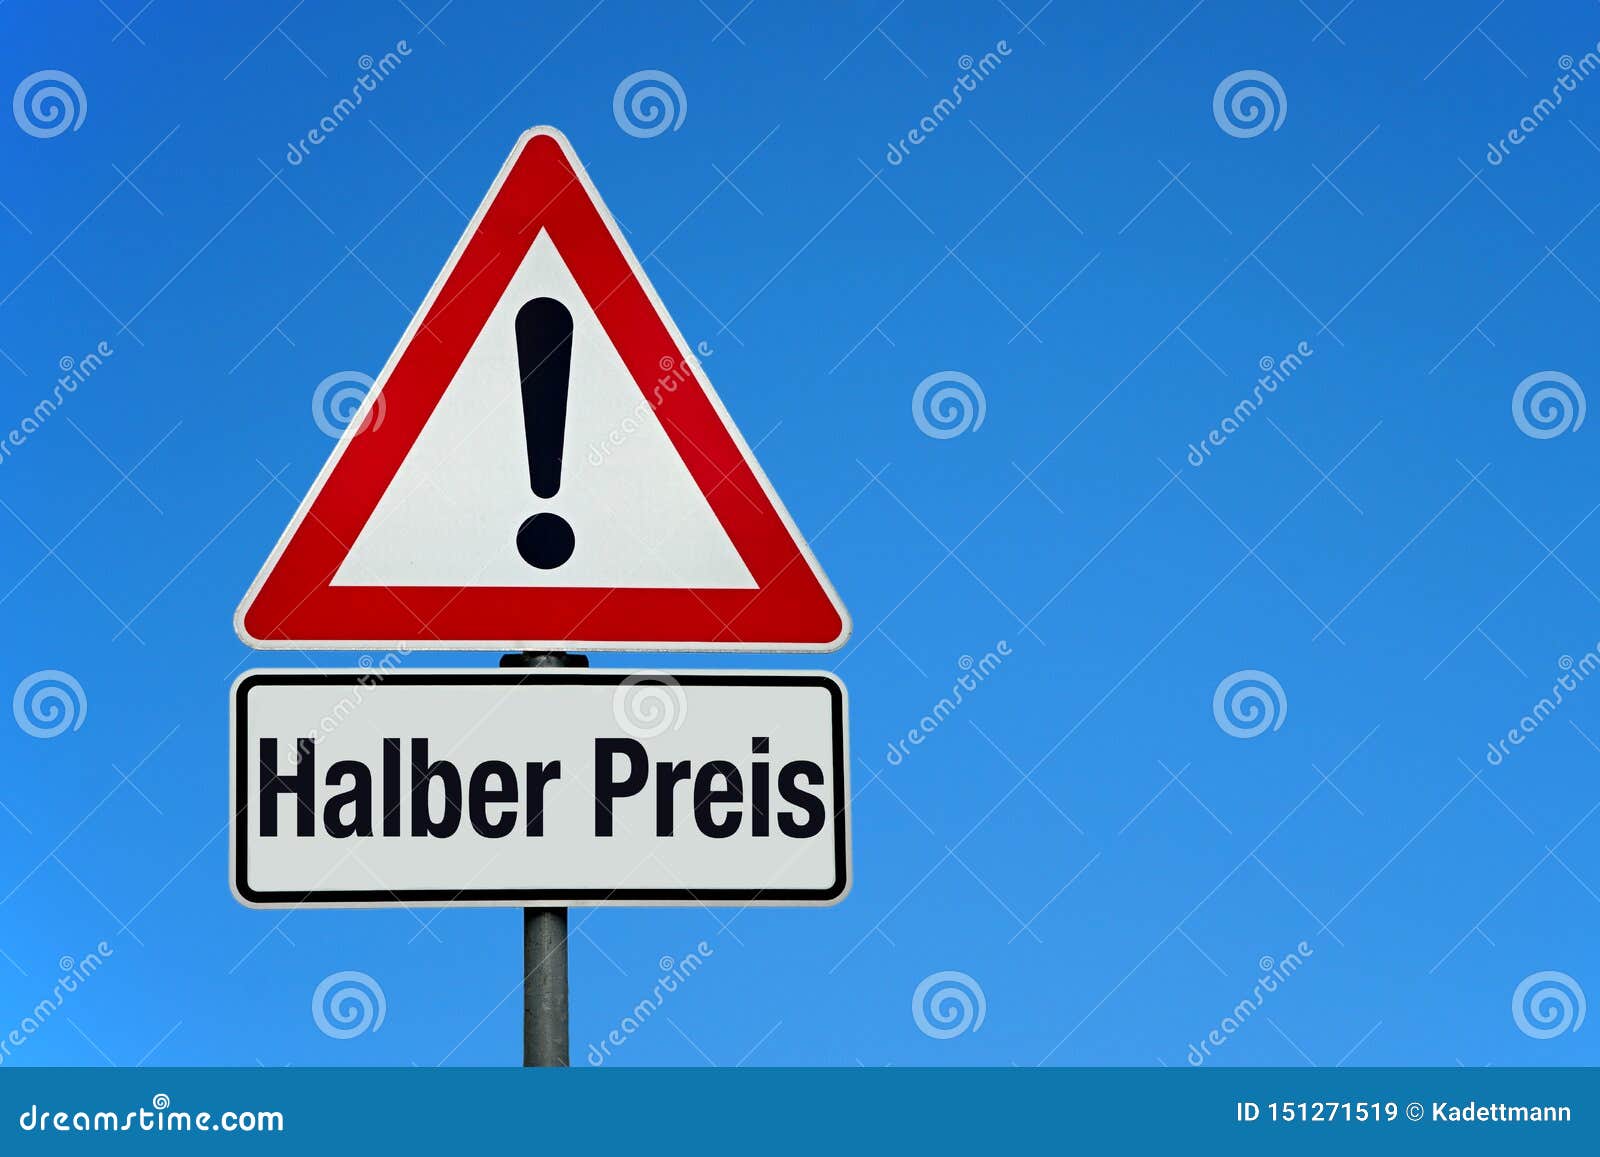 attention and warning sign with blue sky and german text halber preis - translation: half price